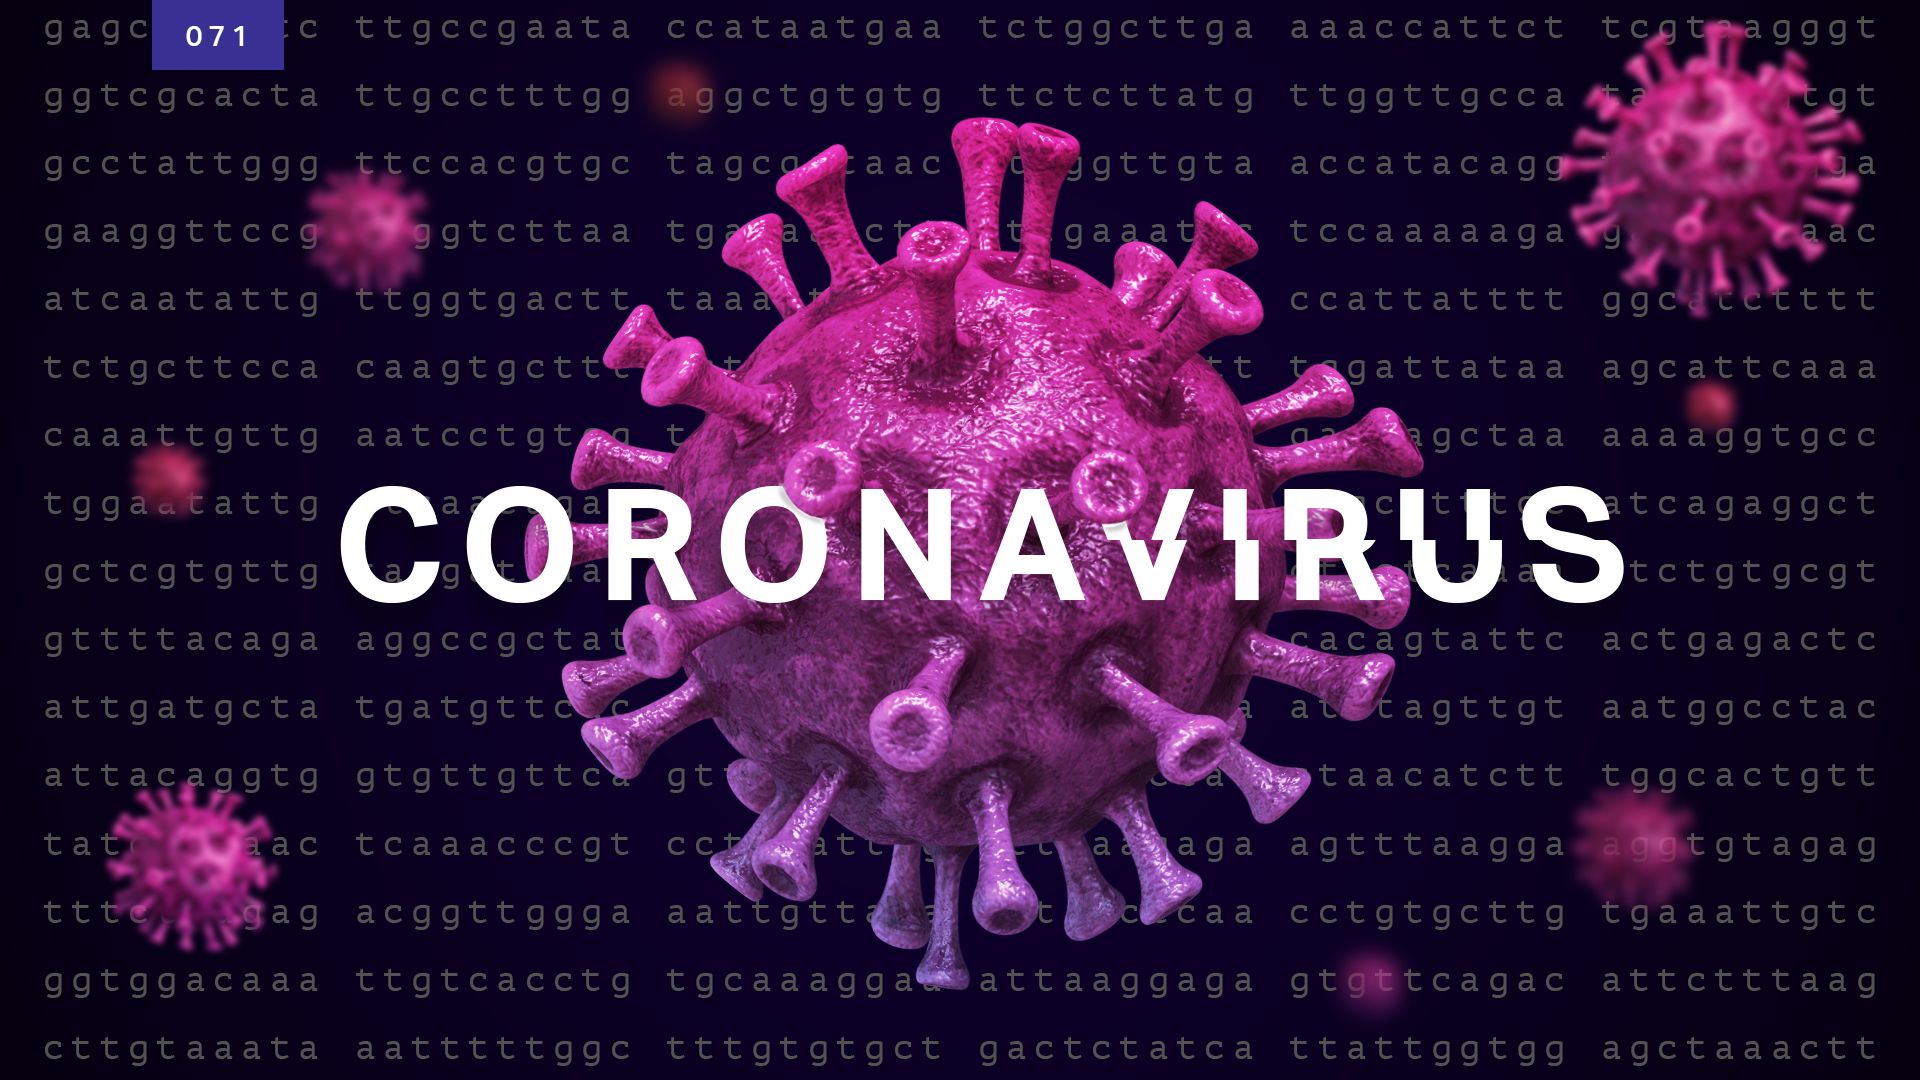 Covid-19 Virus Death Toll Is Higher Then